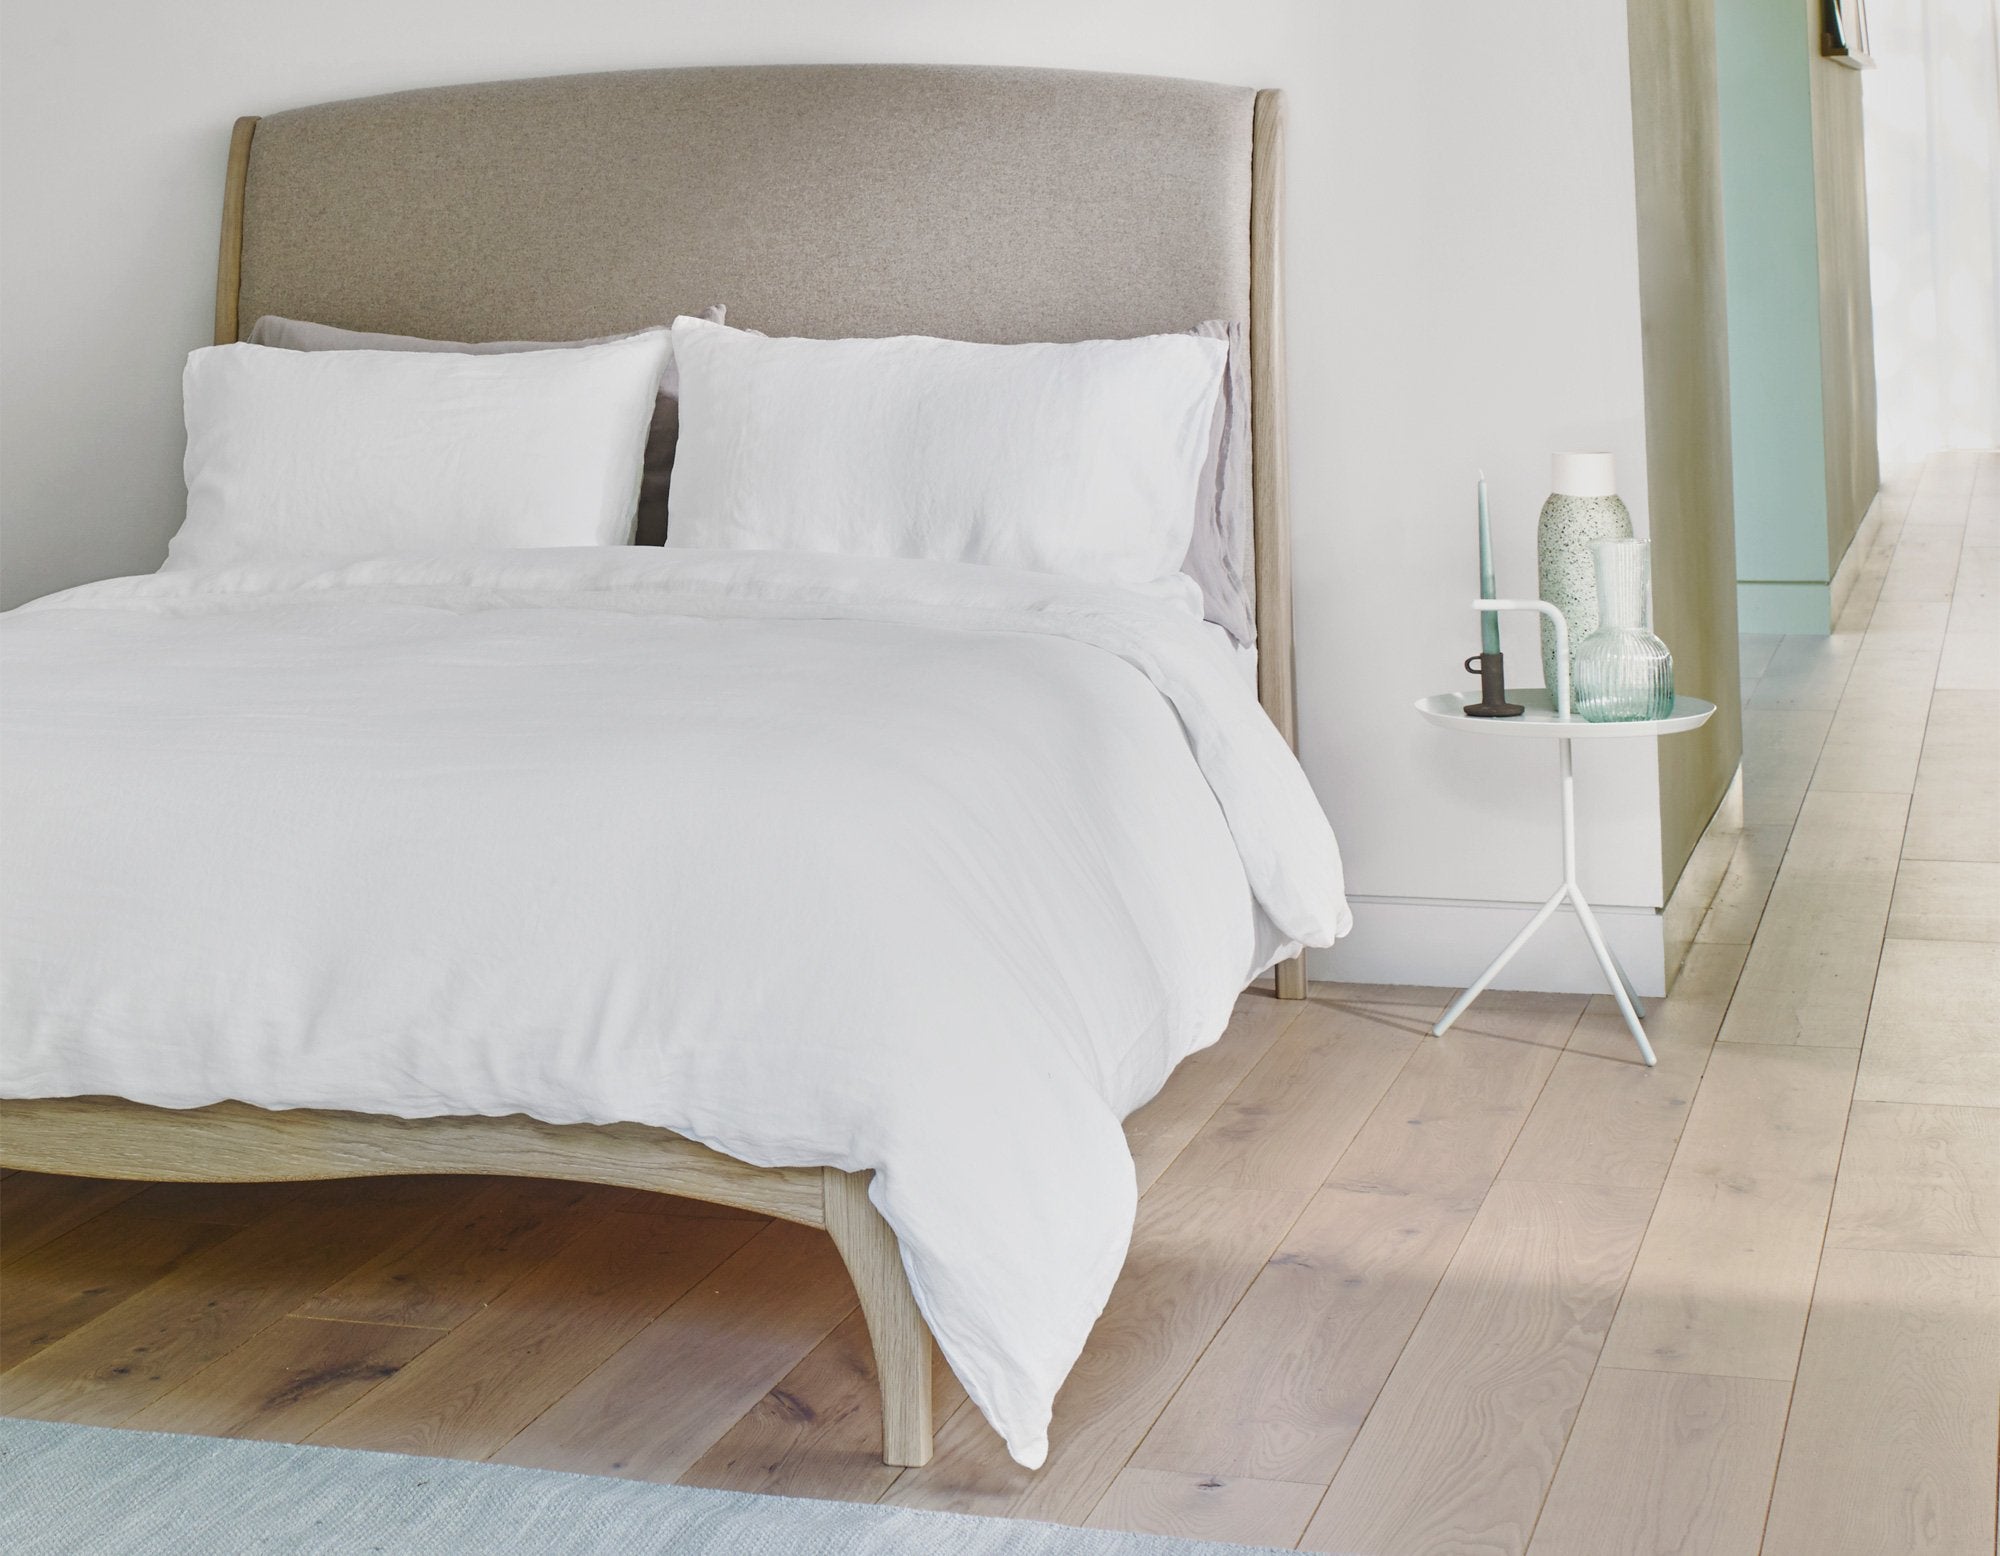 White Linen Bedding on Double Bed | scooms